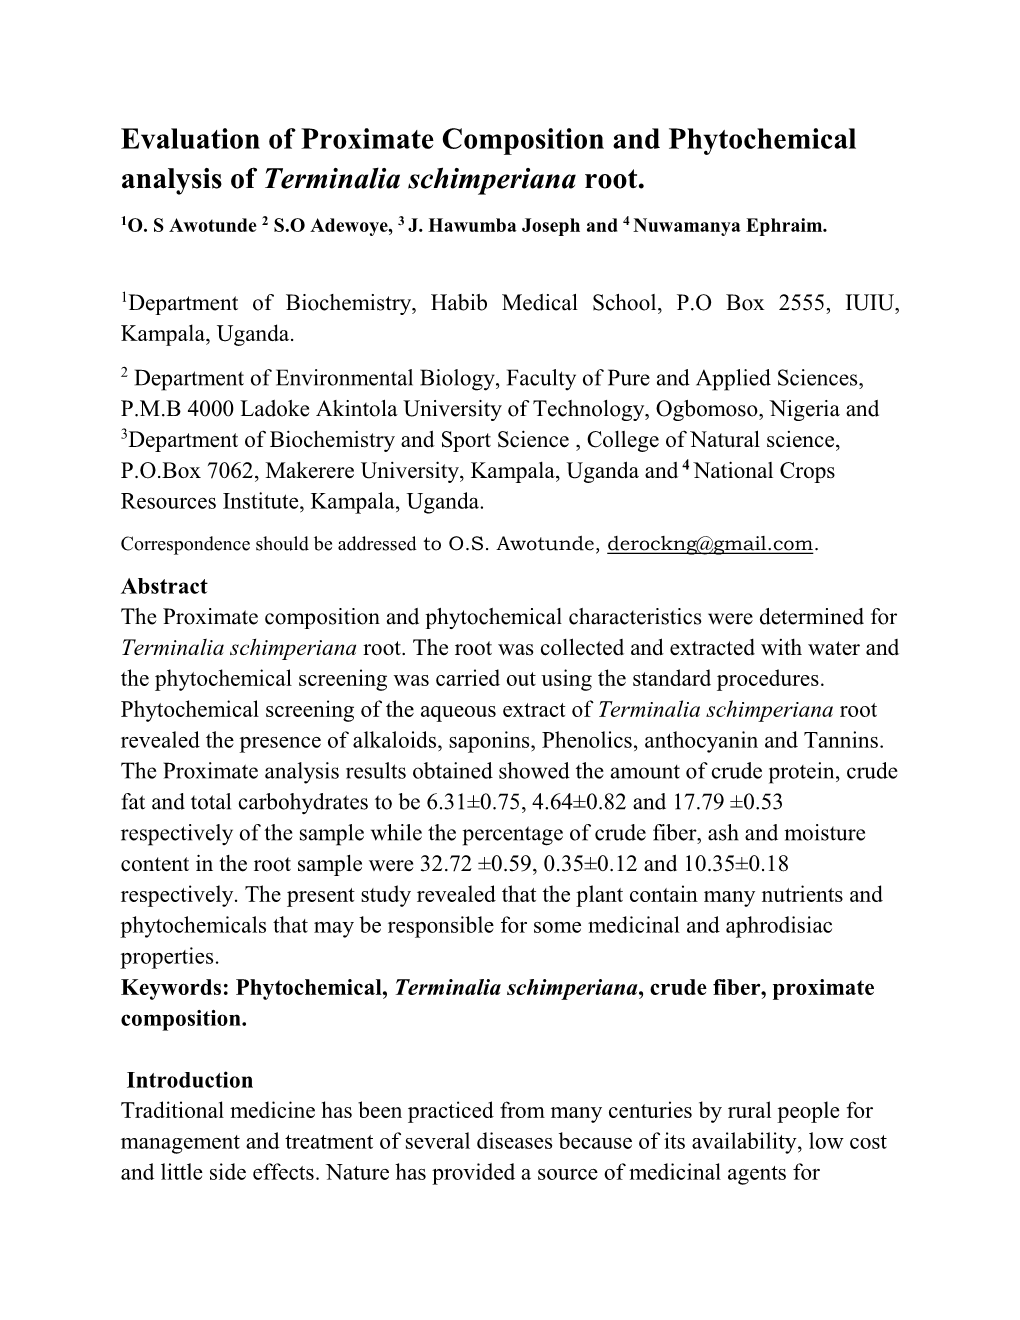 Evaluation of Proximate Composition and Phytochemical Analysis of Terminalia Schimperiana Root